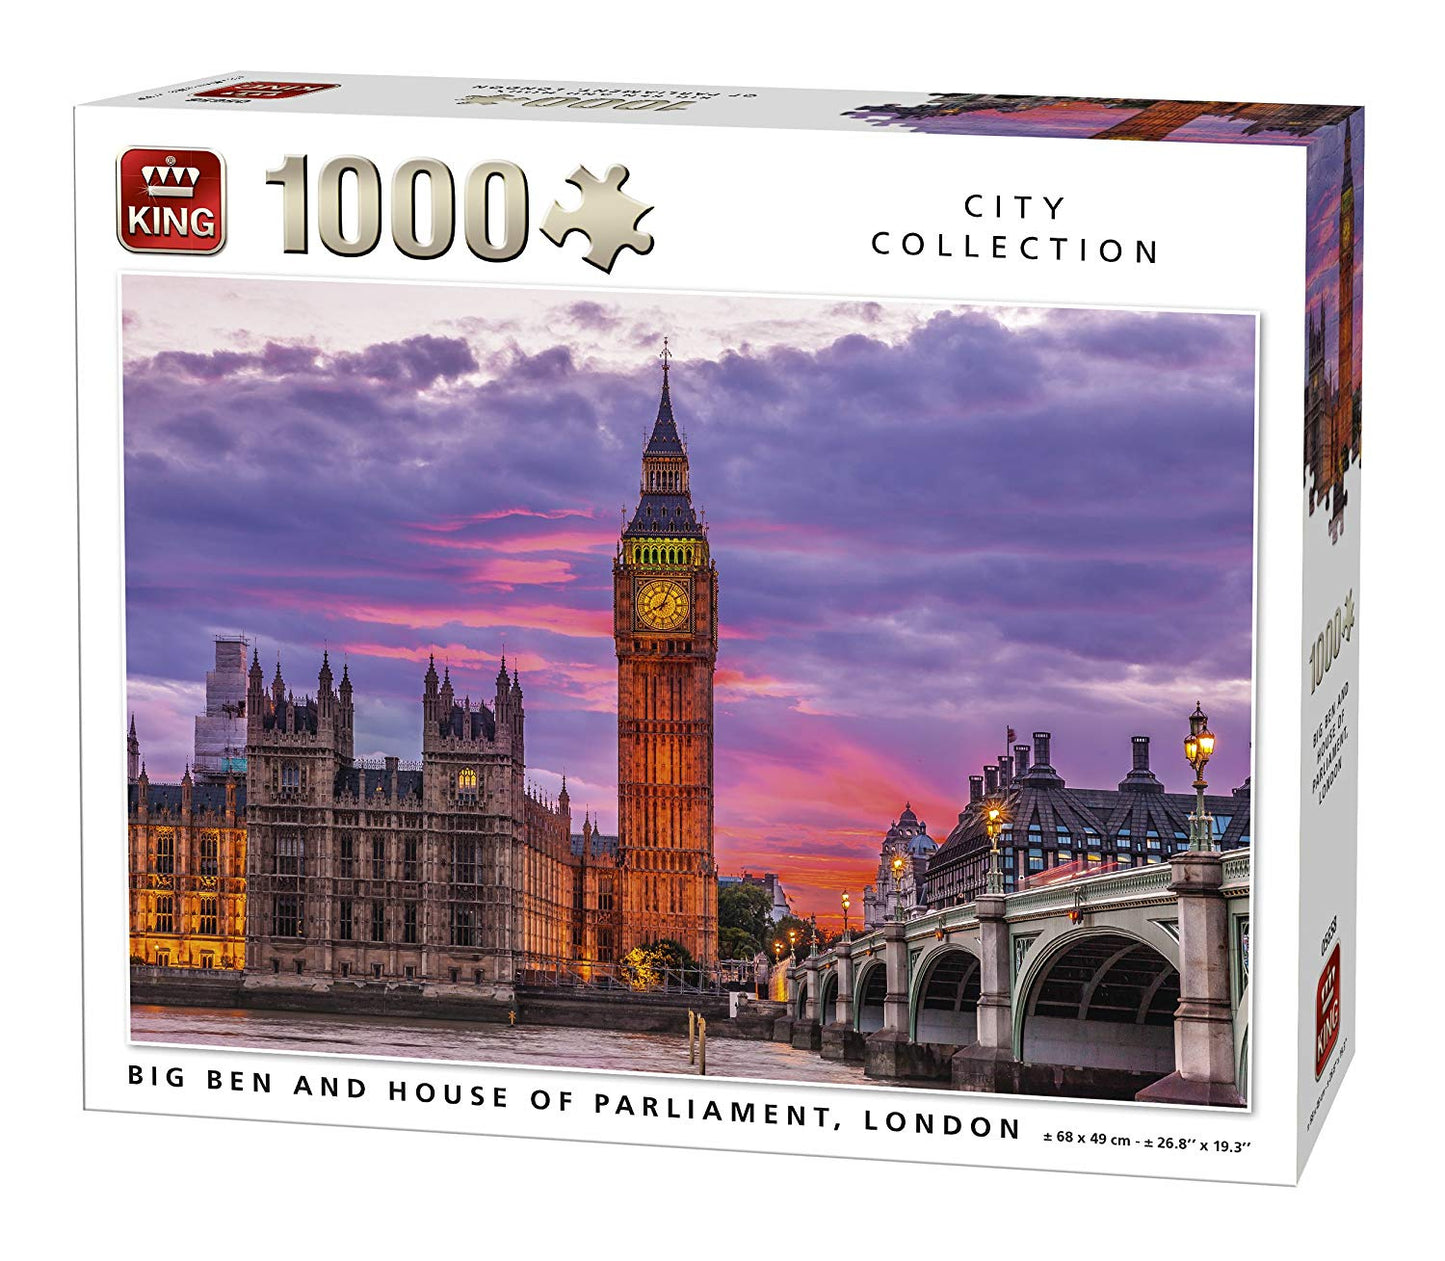 Big Ben and House of Parliament, London by King Int, 1000 Piece Puzzle